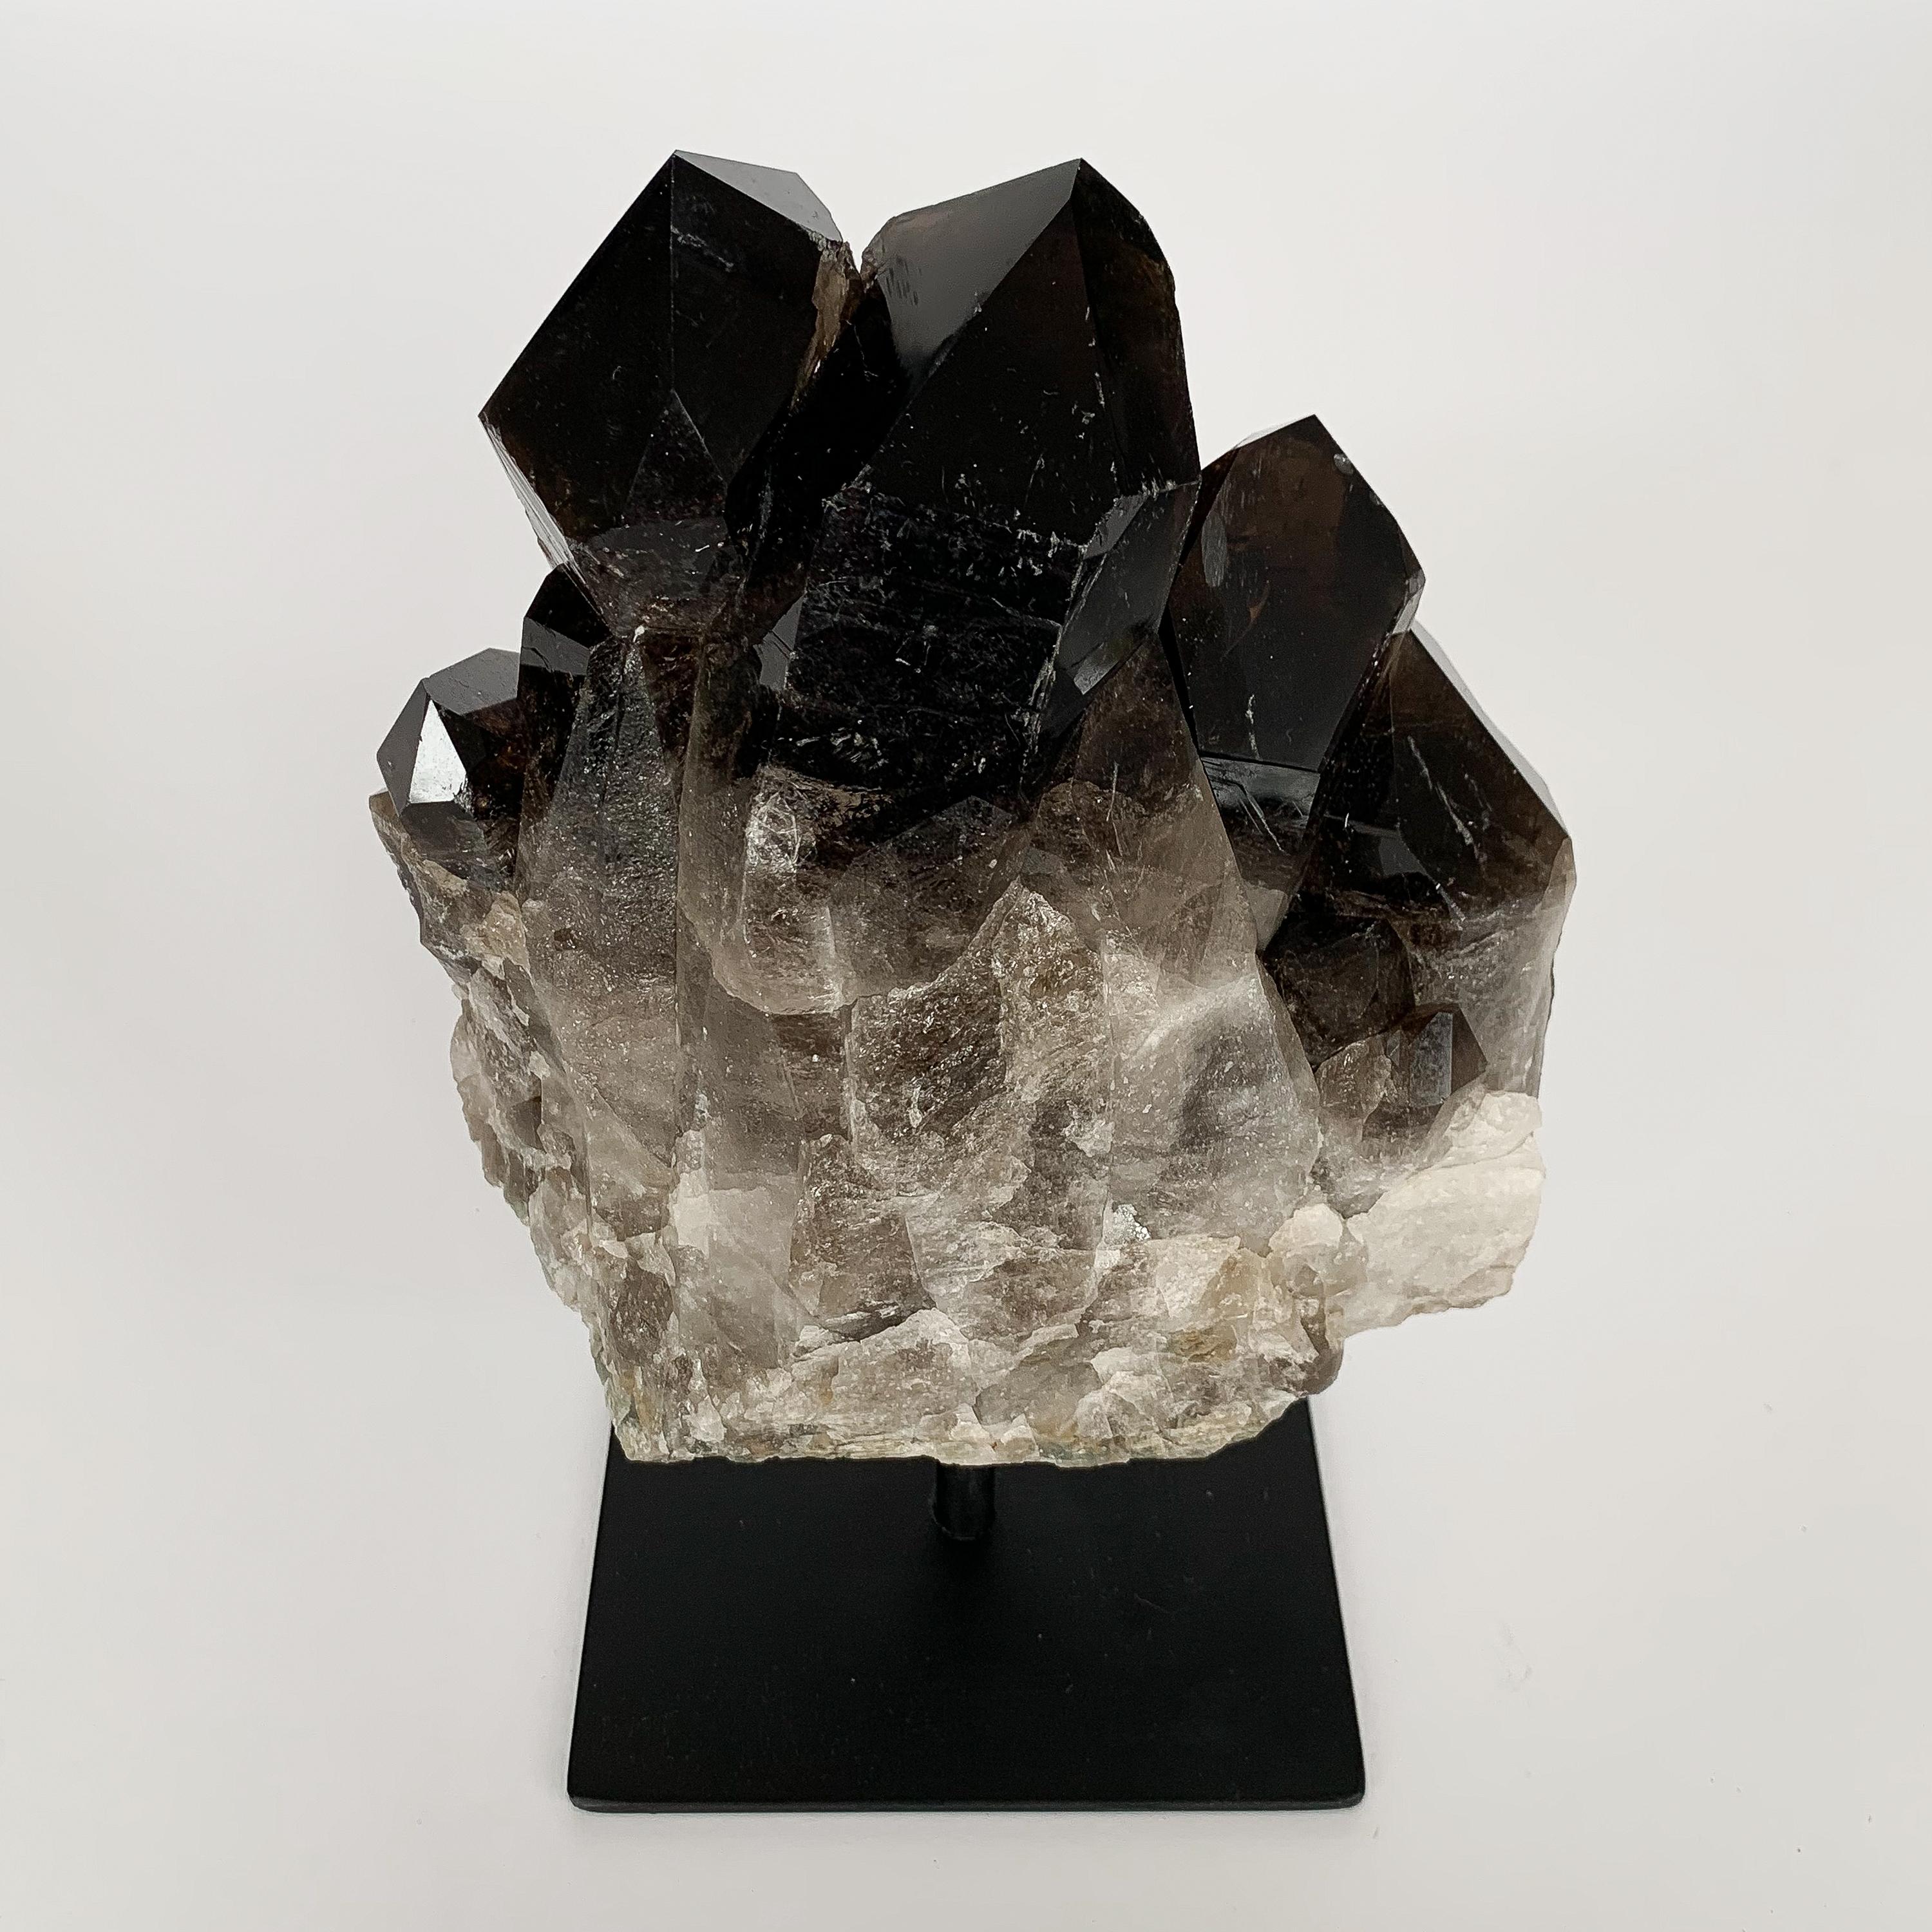 Natural smoky quartz crystal specimen mounted to a painted black metal stand. Measures: 9